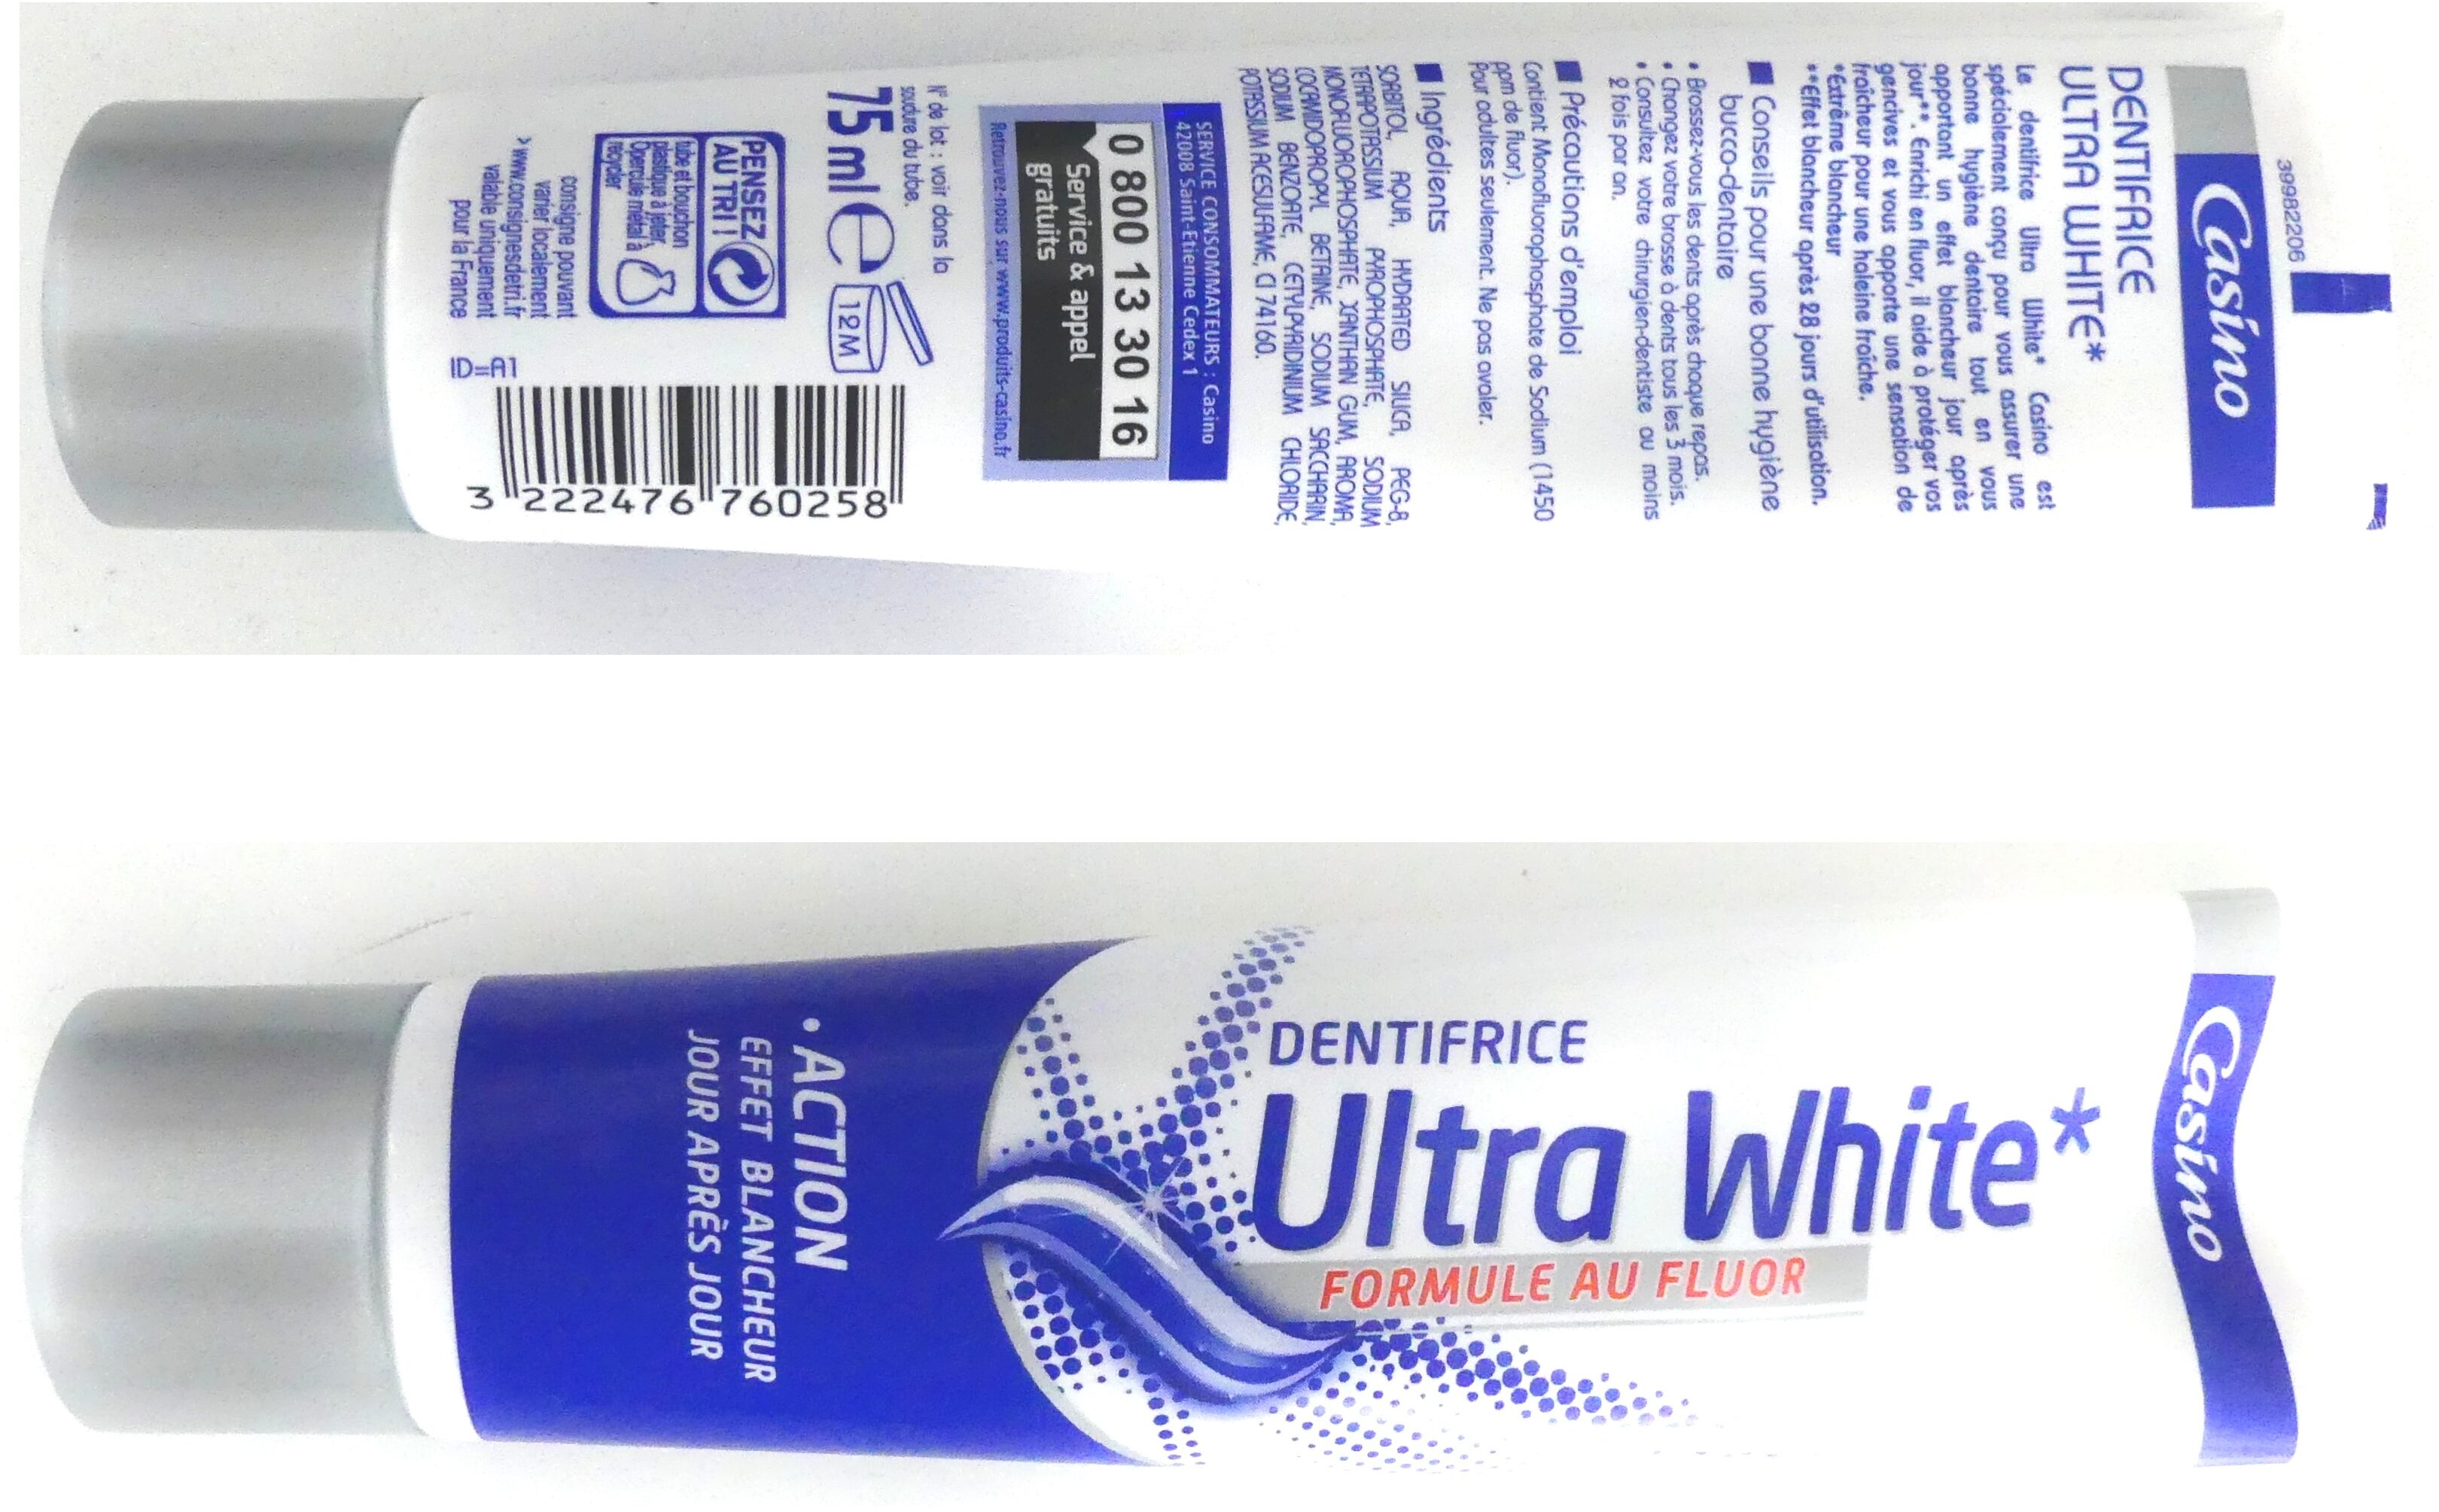 Dentifrice ultra white - Product - fr